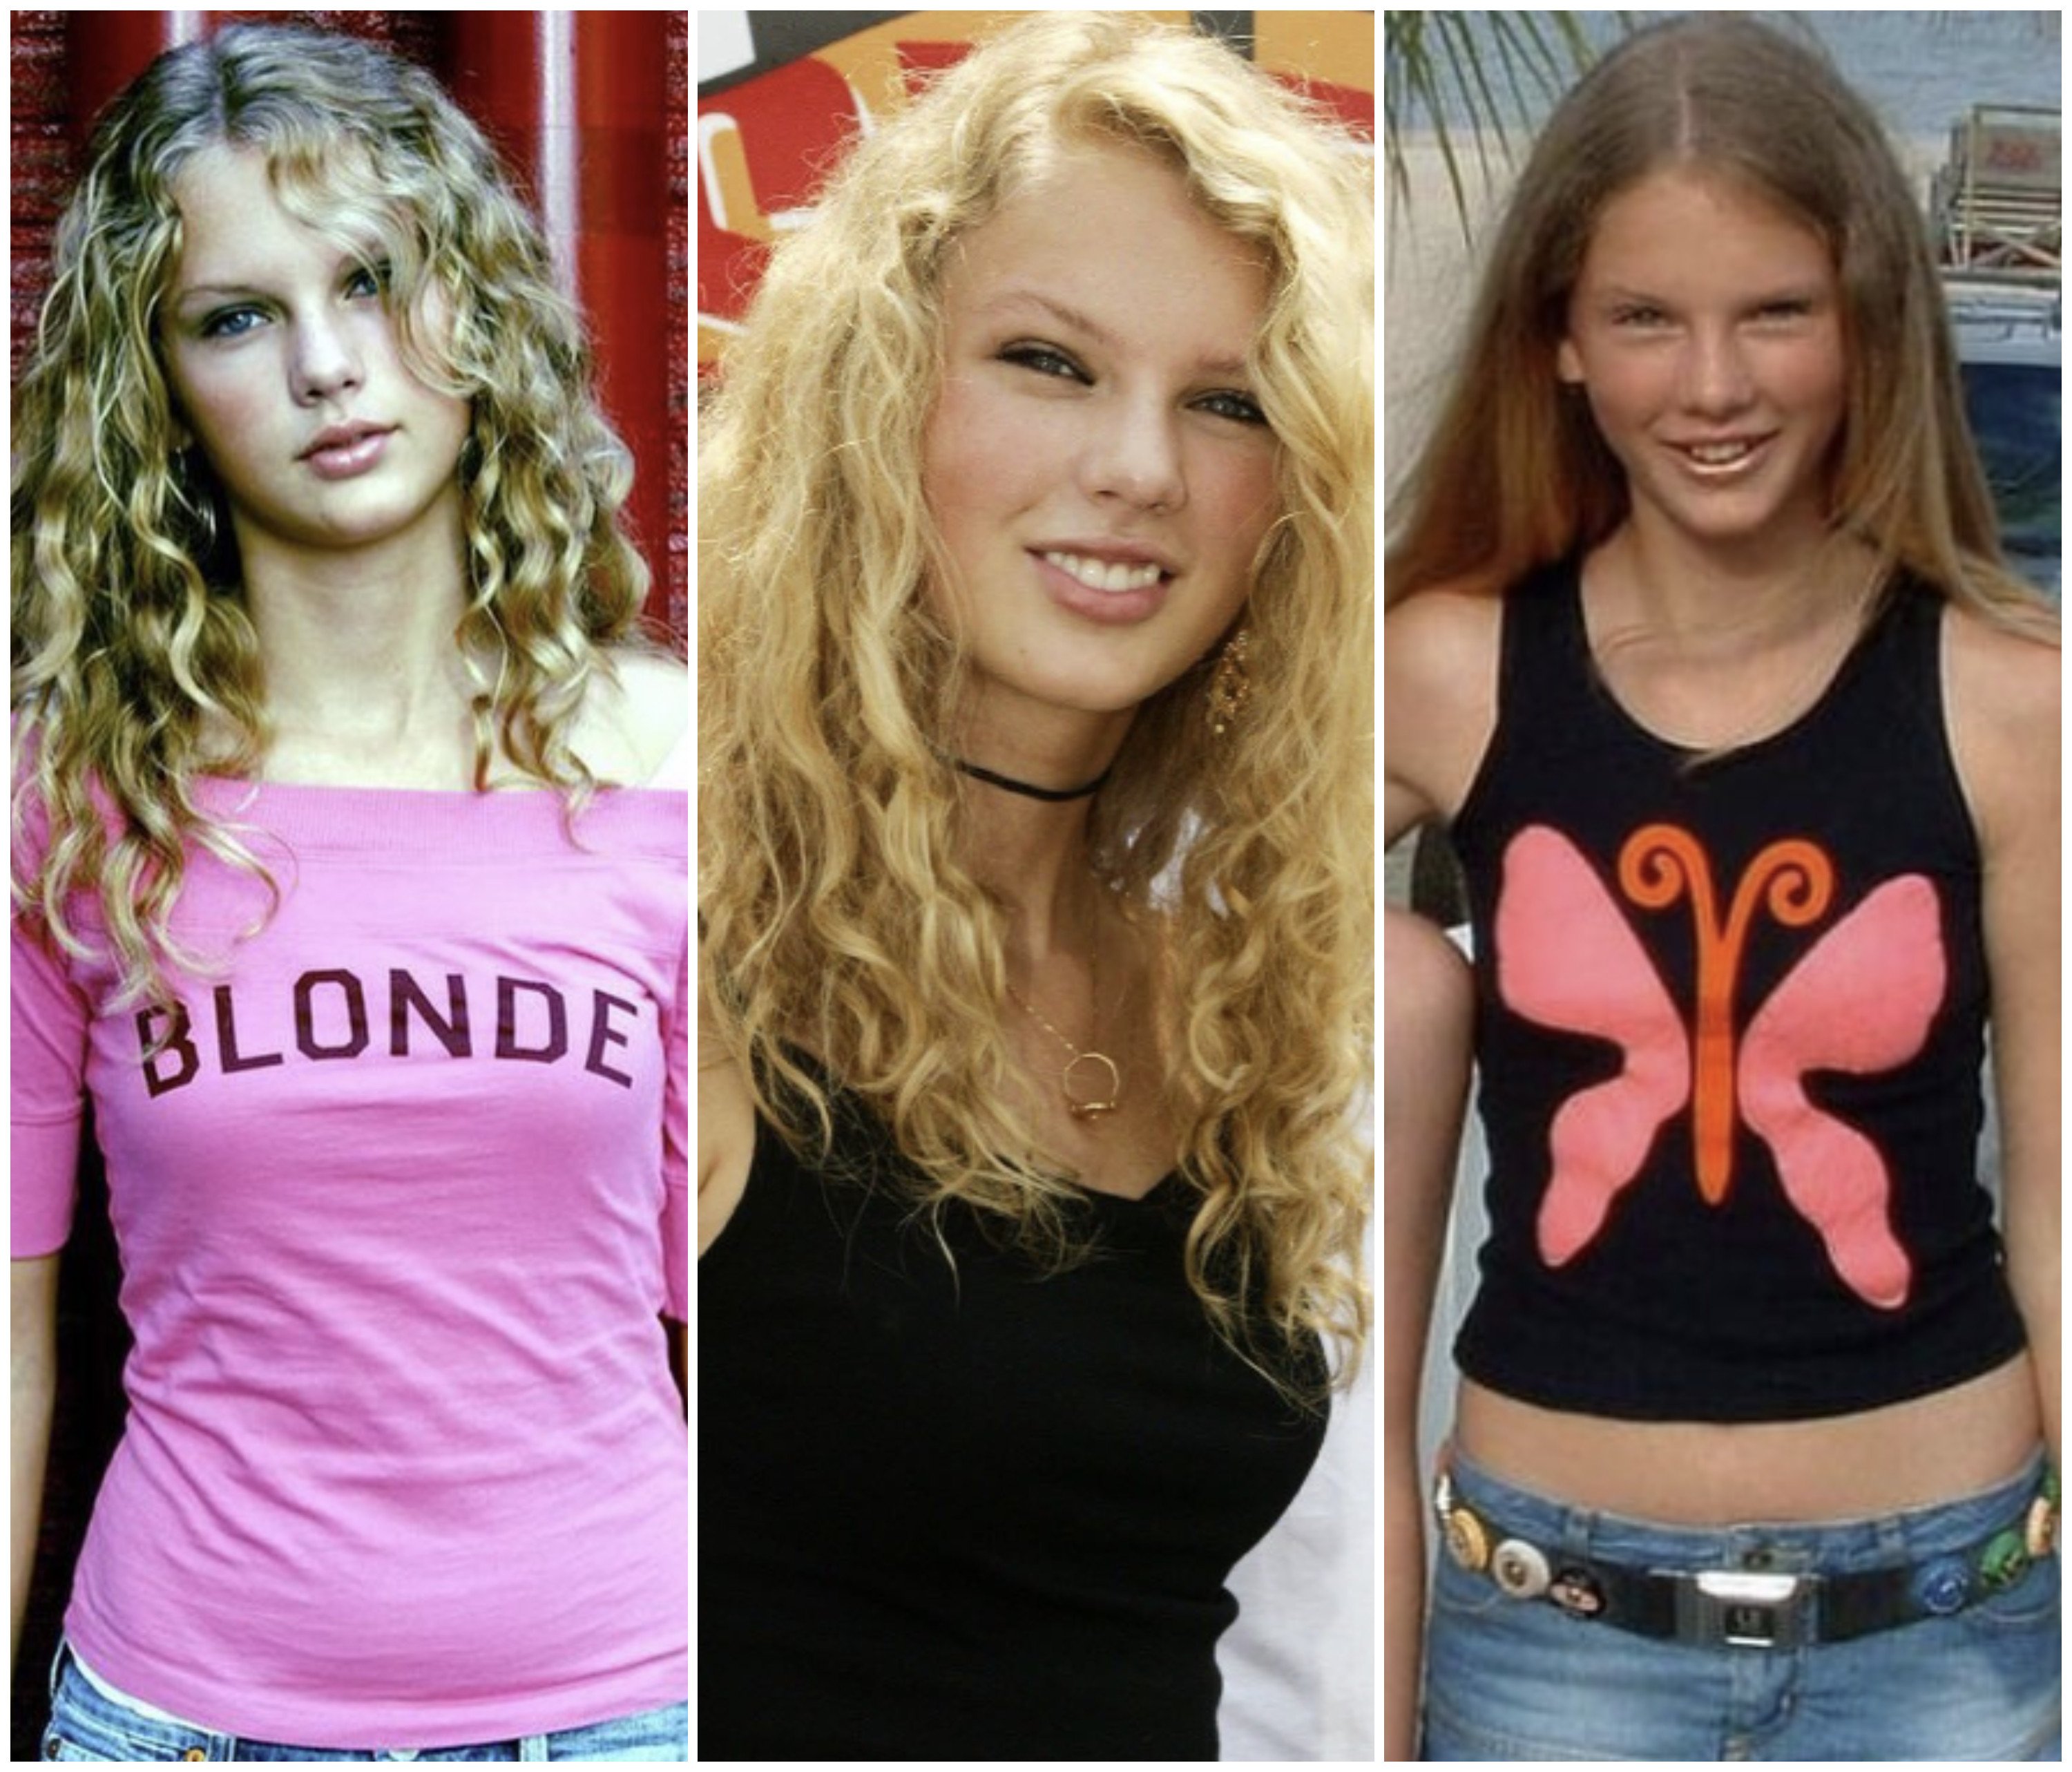 Taylor Swift's early Eras: the star's pre-fame days, in pictures – from the  'Style' singer's performance for Britney Spears to mirror selfies with  Selena Gomez and dates with Jake Gyllenhaal